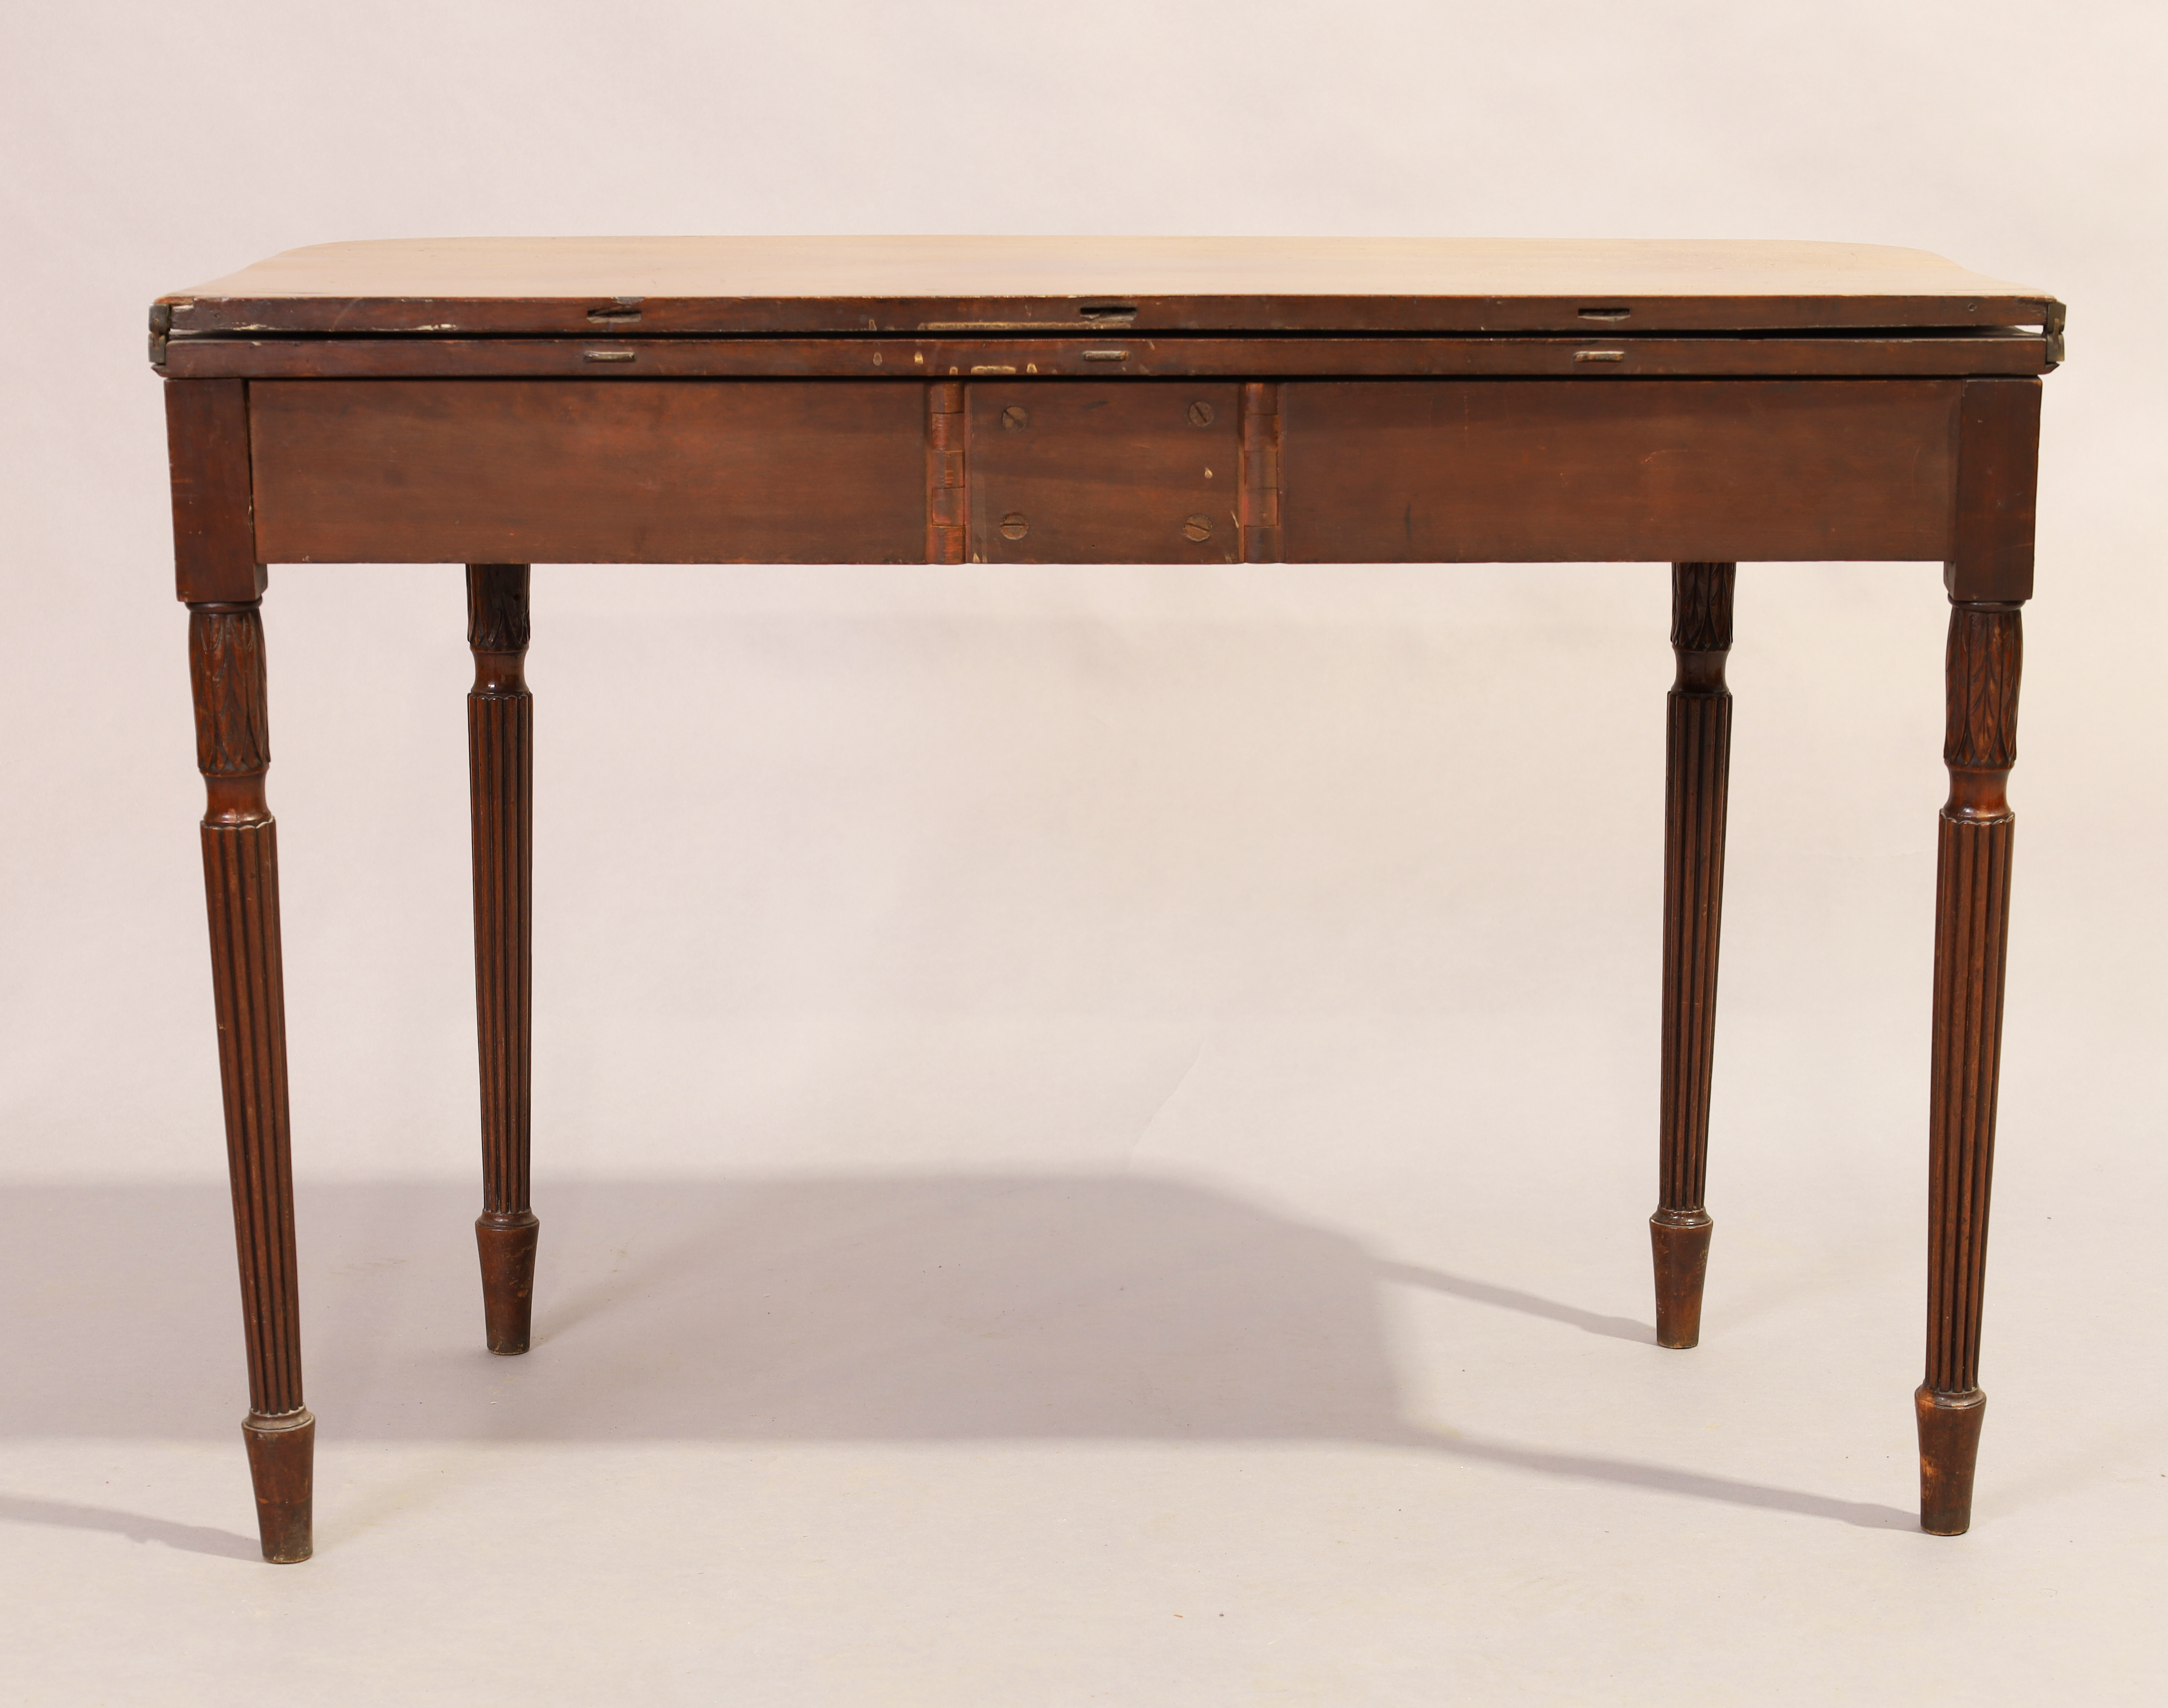 A George III inlaid mahogany tea table, last quarter 18th century, with frieze drawer, on carved ... - Image 5 of 5